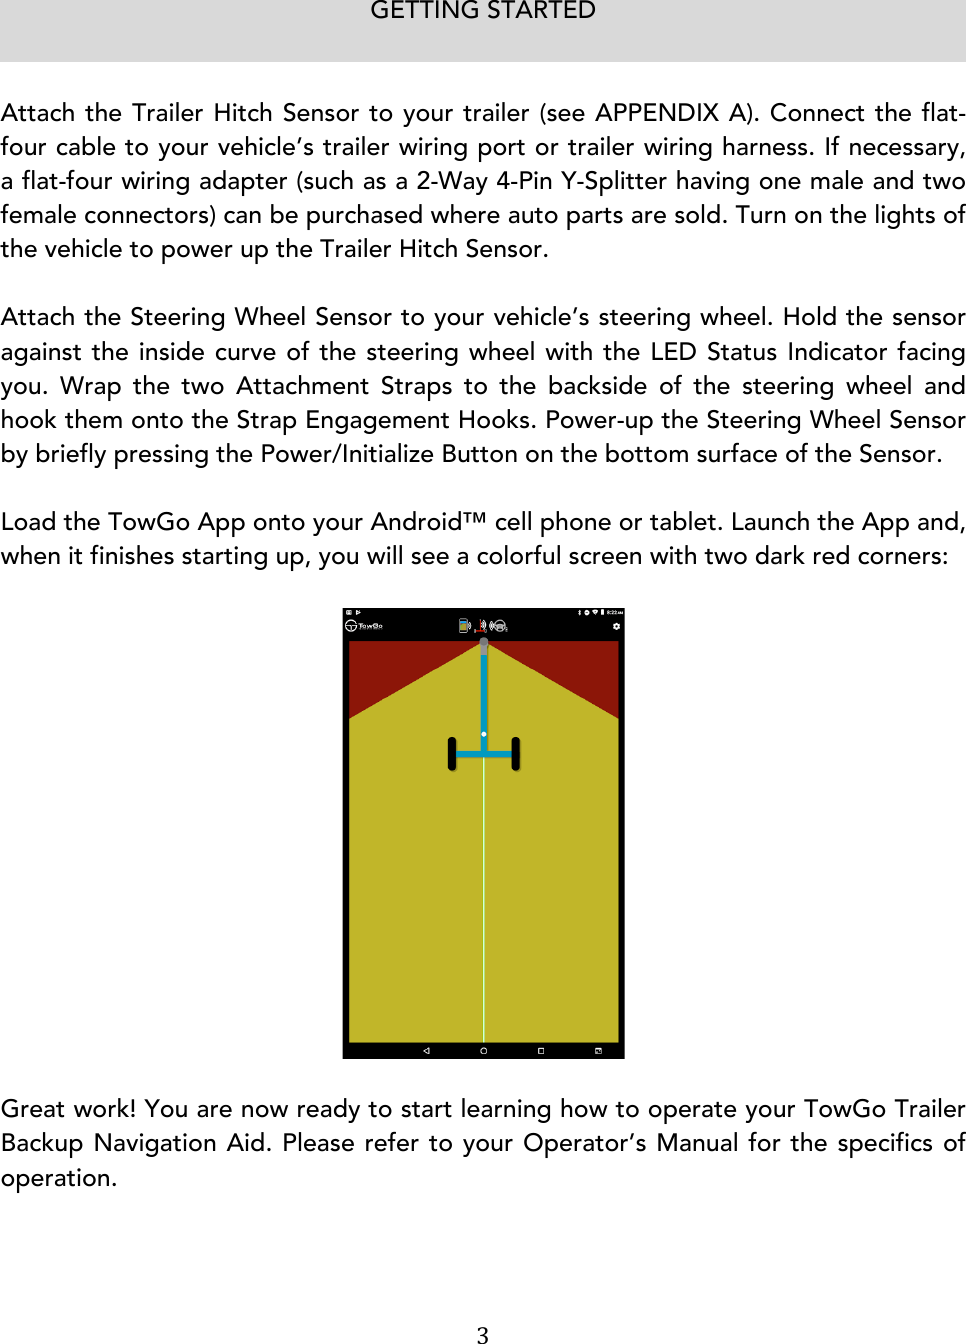 Page 7 of TowGo 1 Trailer Backup Navigation Aid User Manual UserGuide